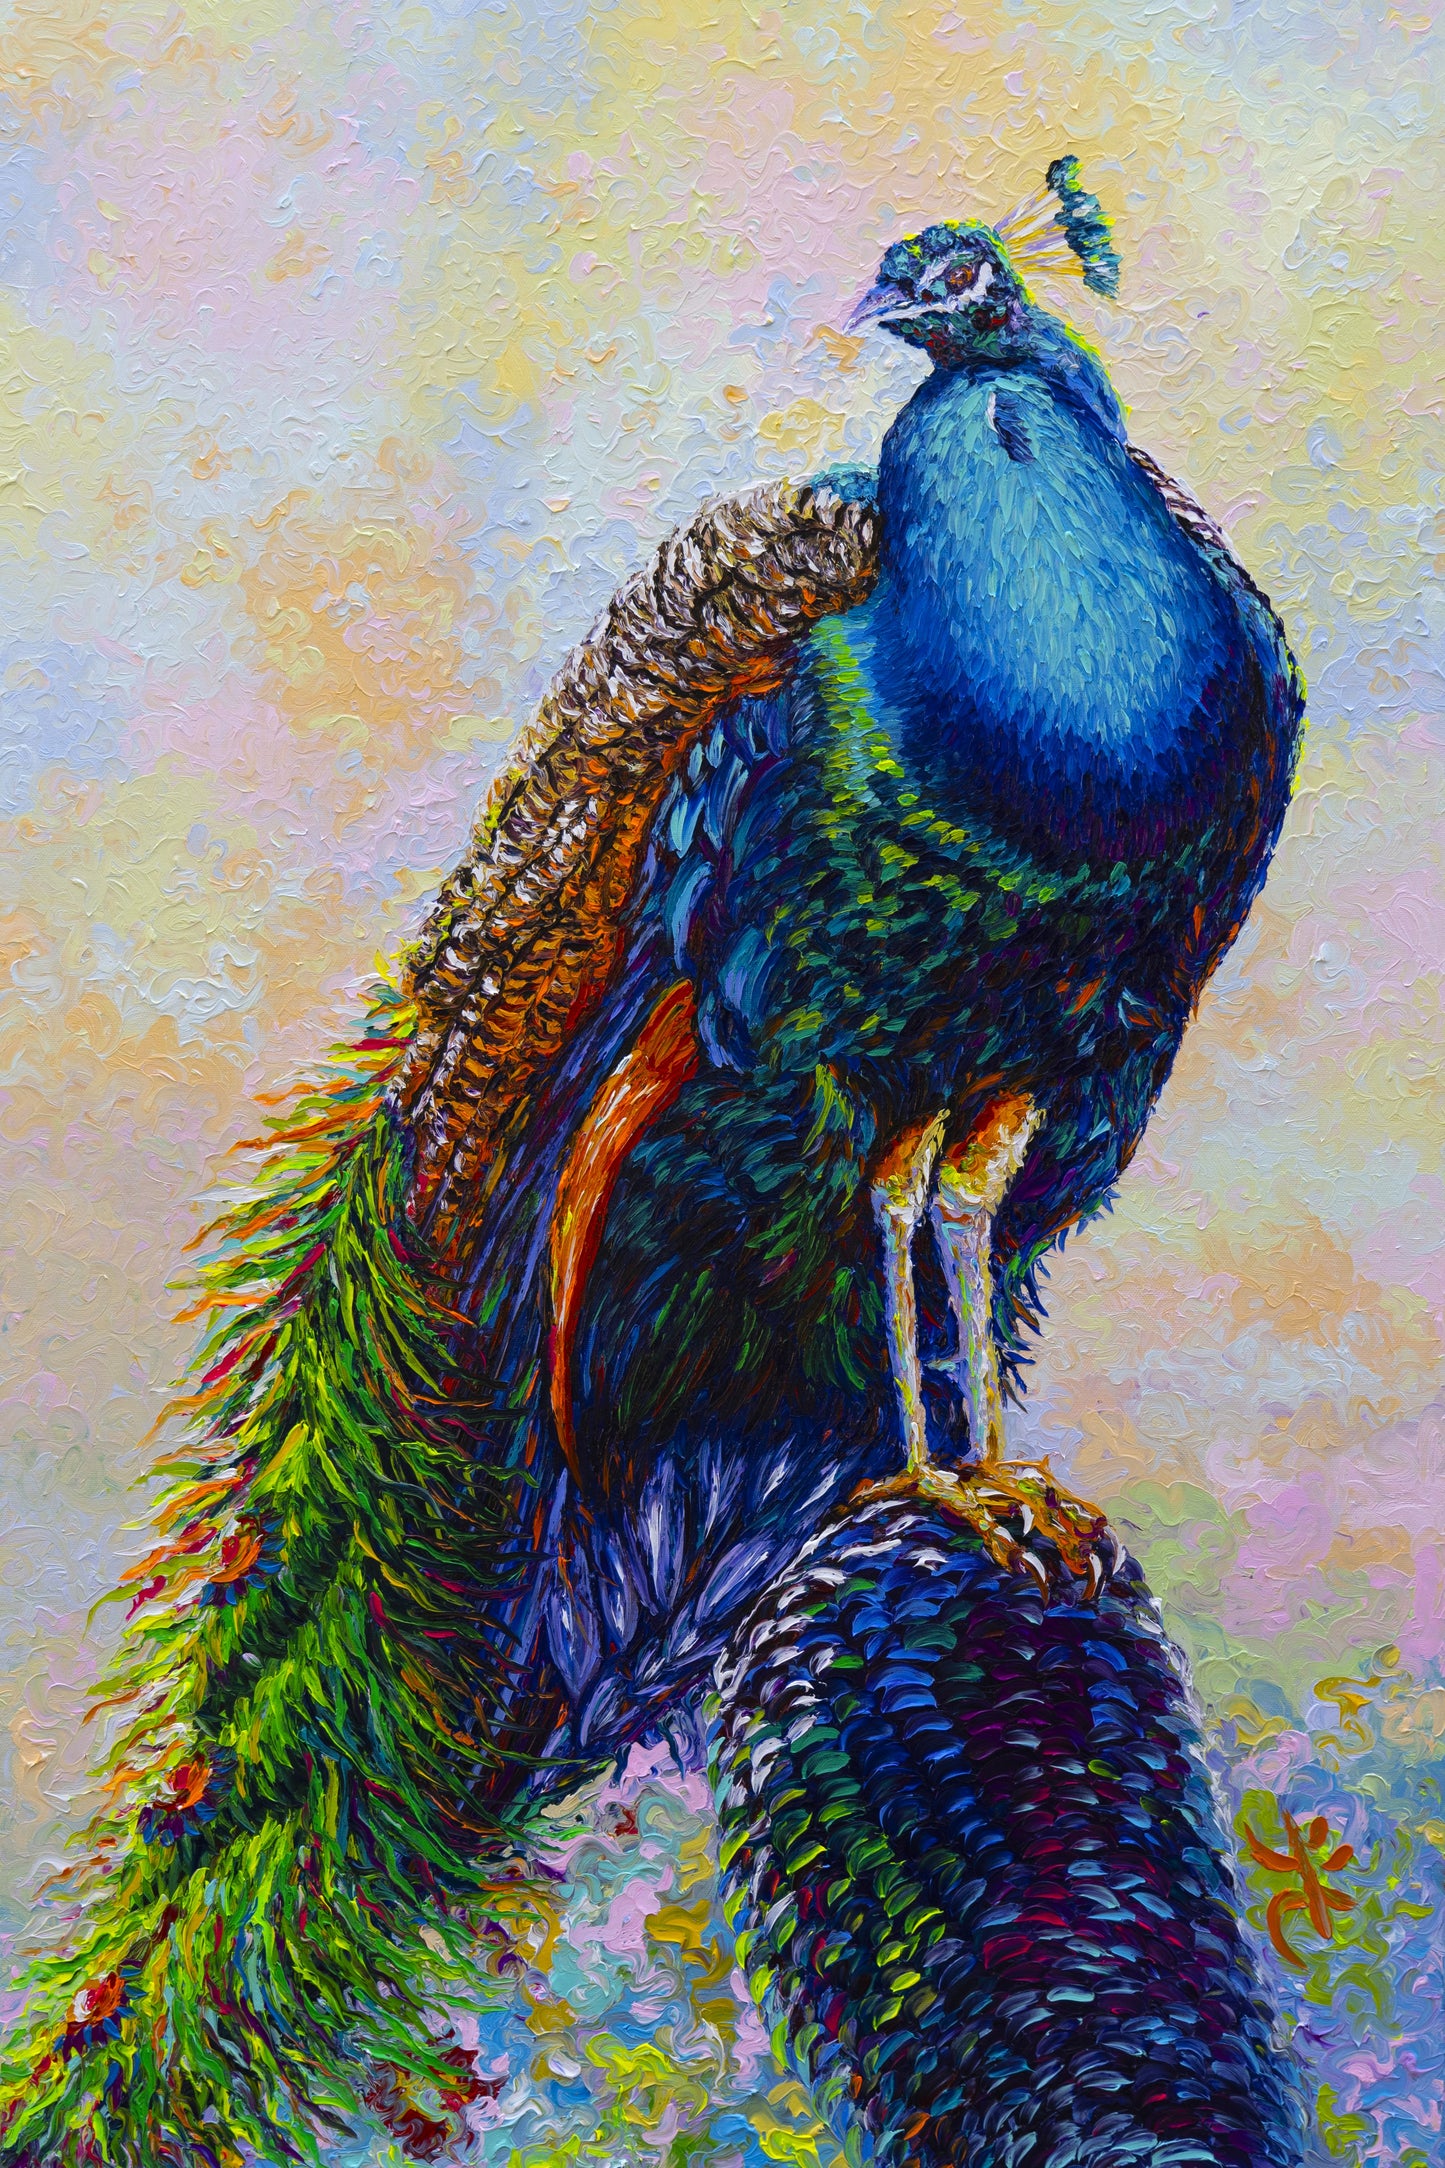 The beauty on the Rock - Peacock - Oil Finger Painting Print - Giclée Fine Art Print